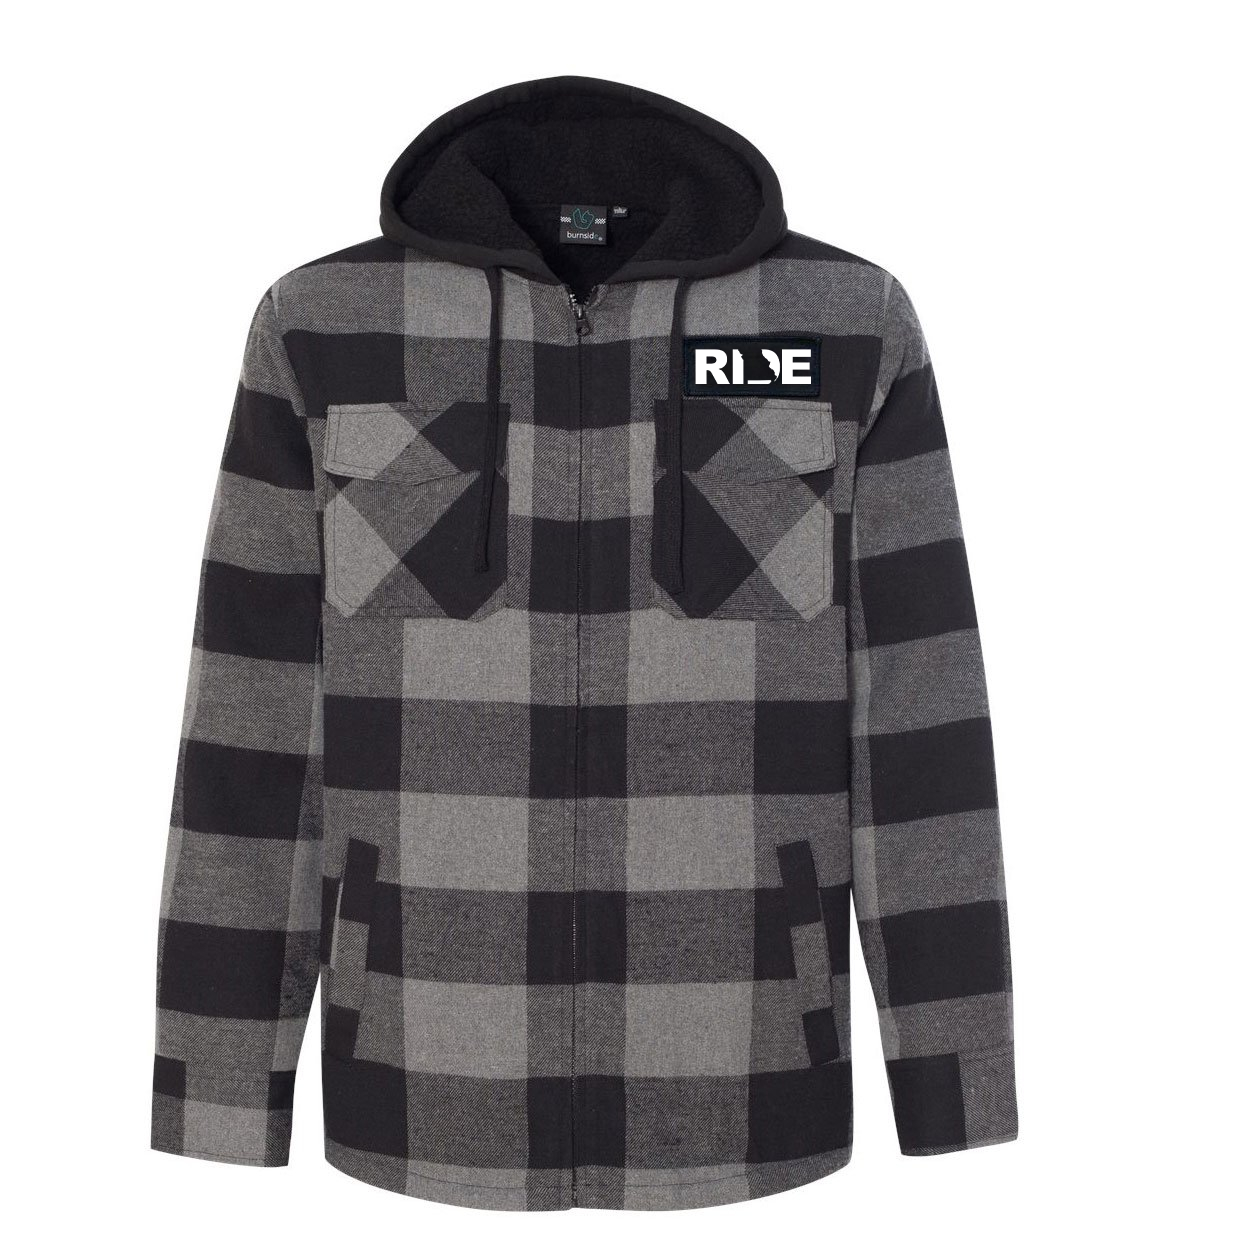 Ride Missouri Classic Unisex Full Zip Woven Patch Hooded Flannel Jacket Black/Gray (White Logo)